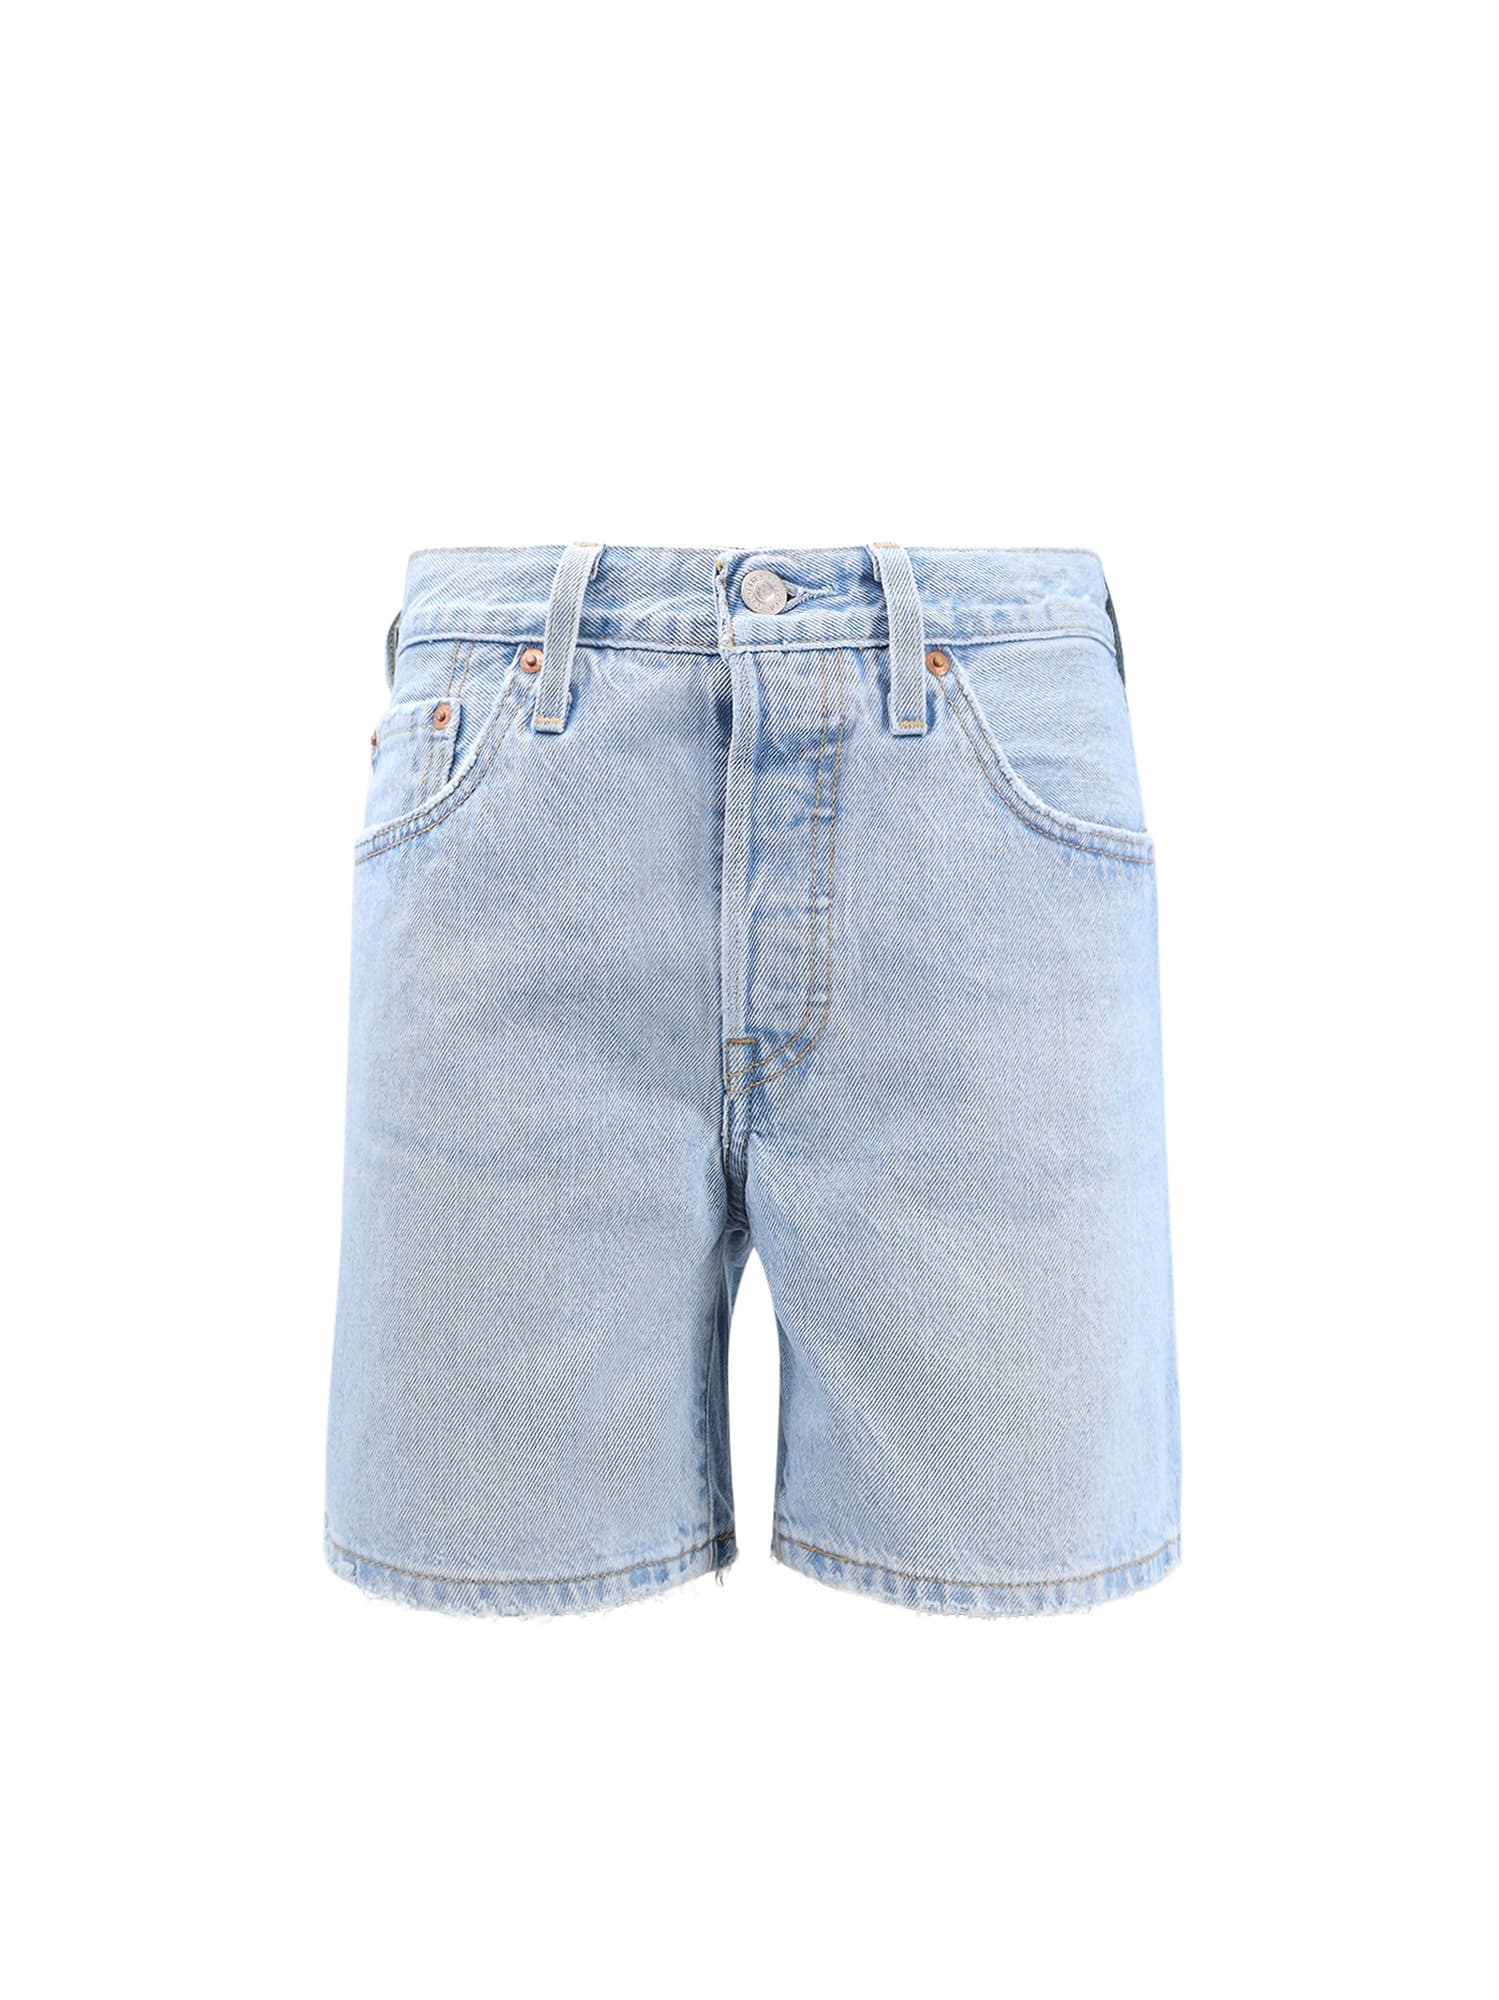 Levi's Shorts In Clear Blue